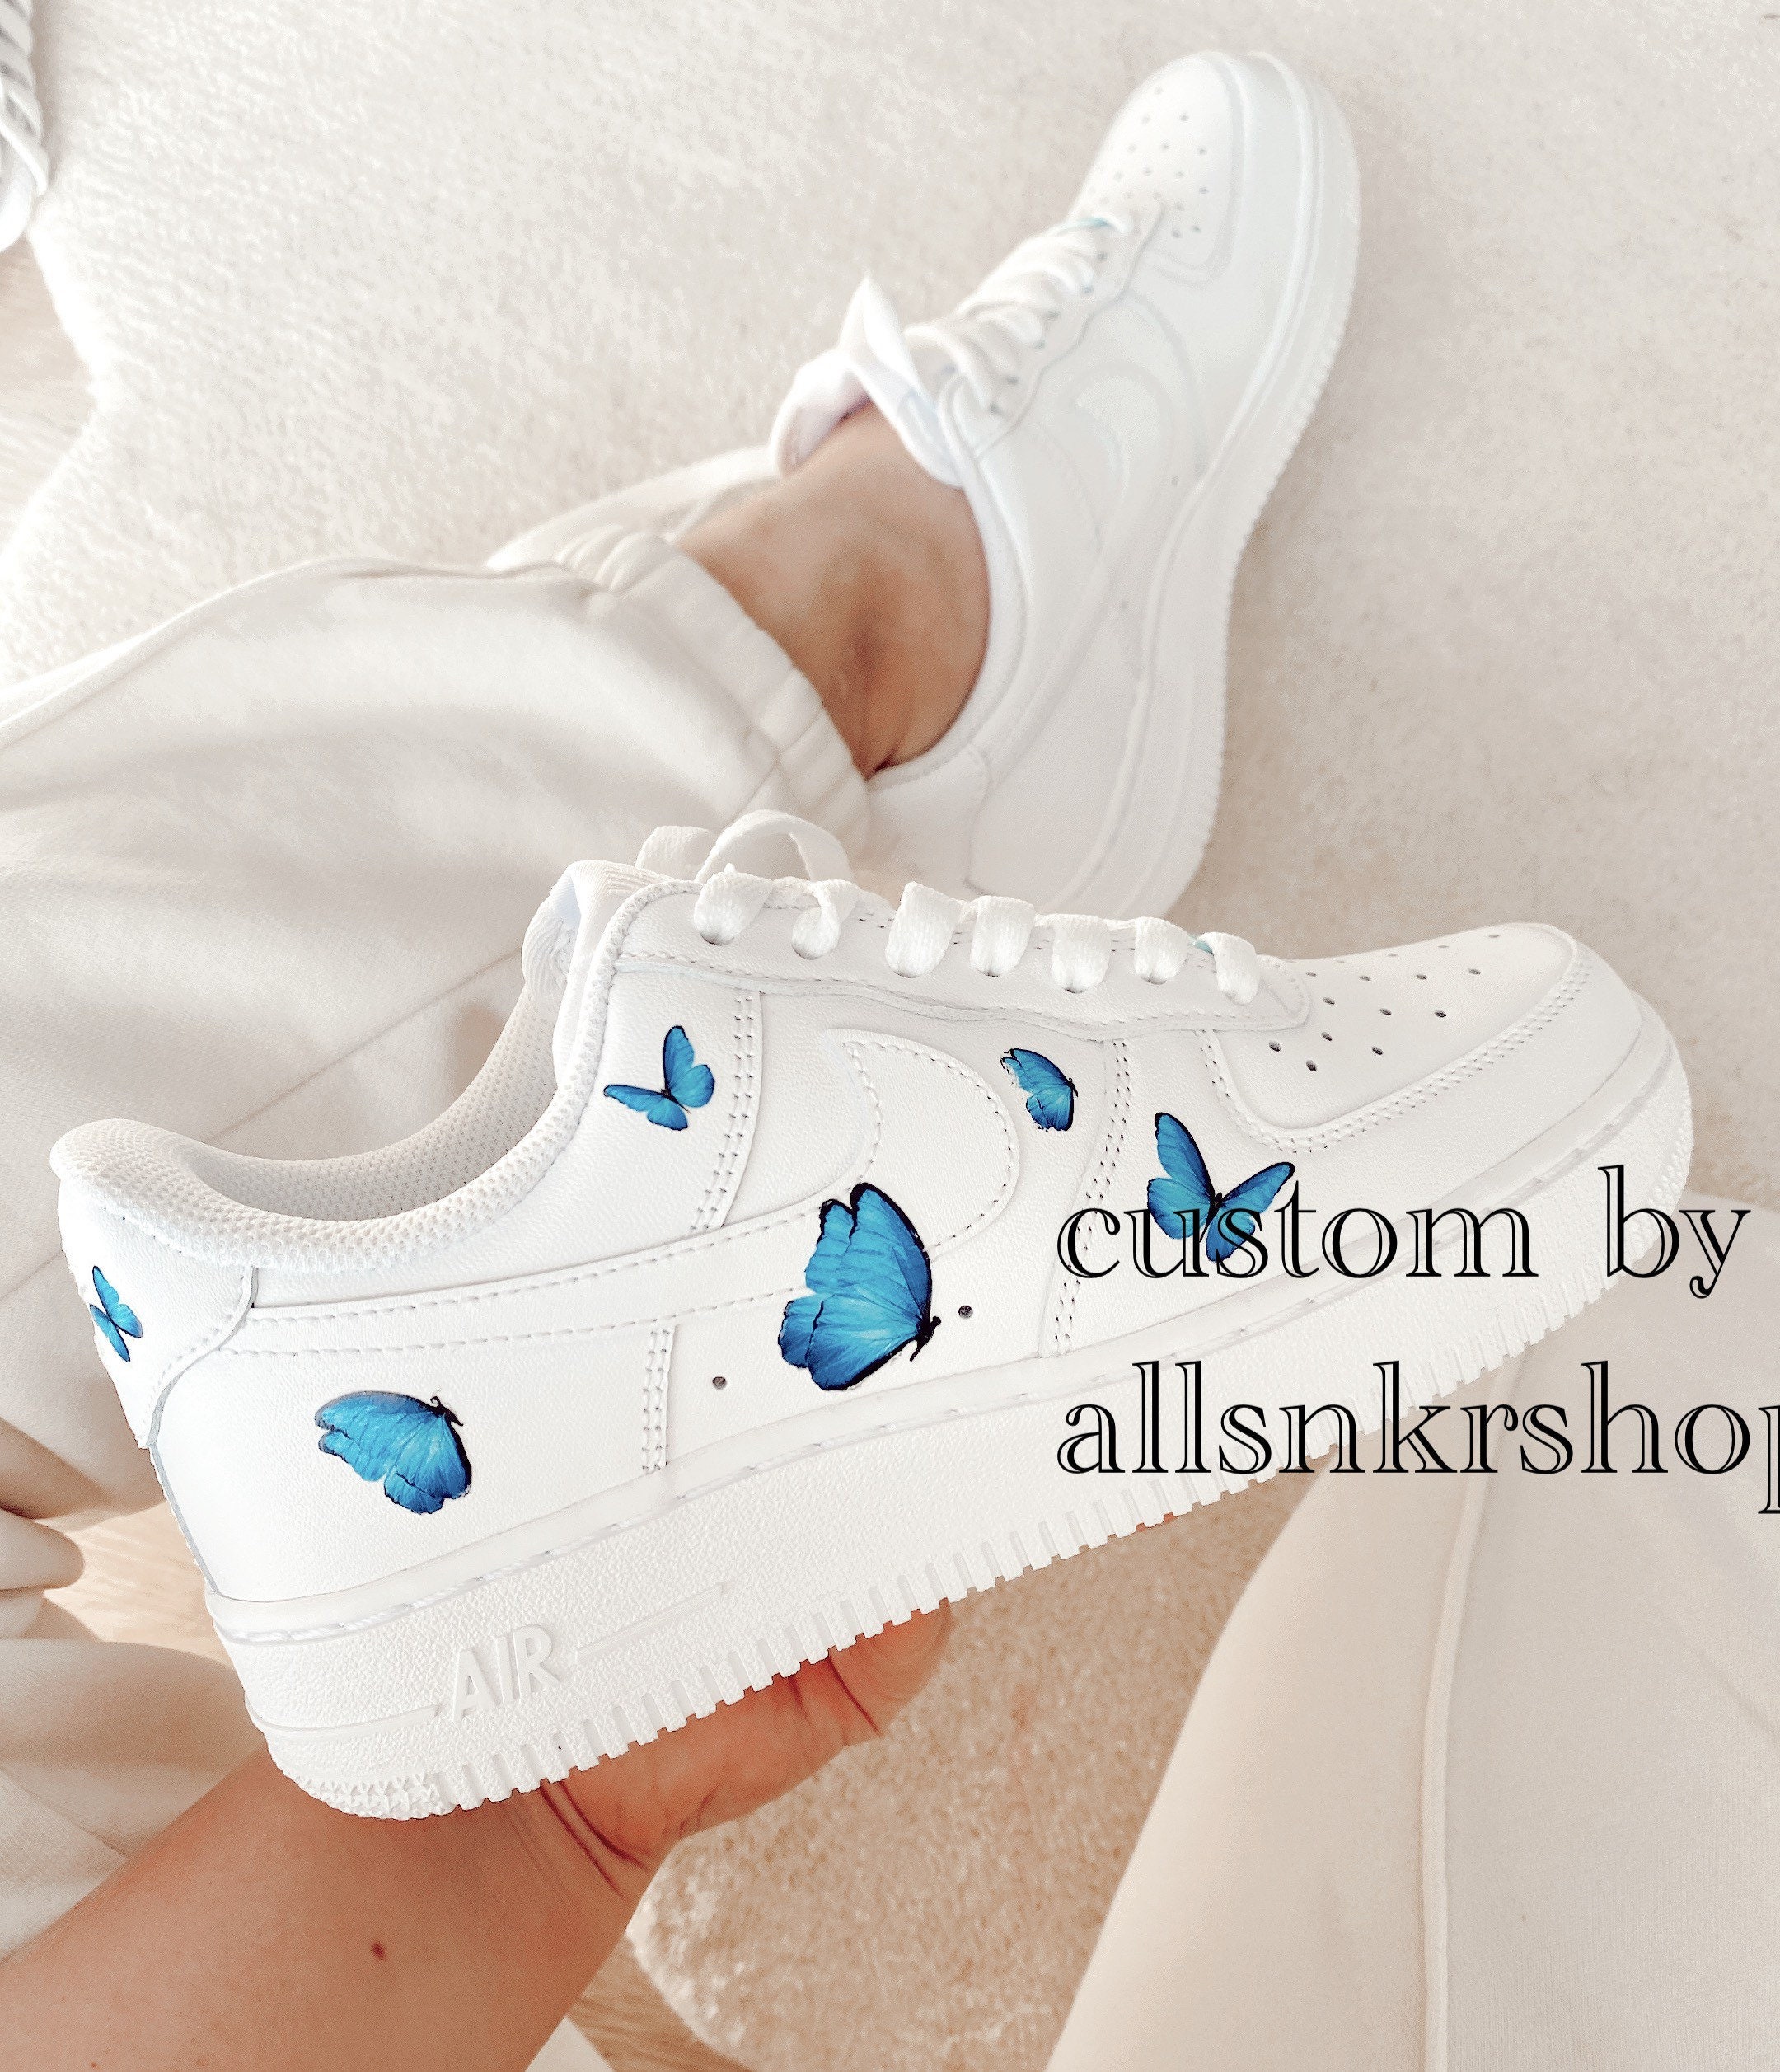 Personalizado Air Force 1 Blue Butterfly  Nike shoes air force, Air force  shoes, Nike air shoes